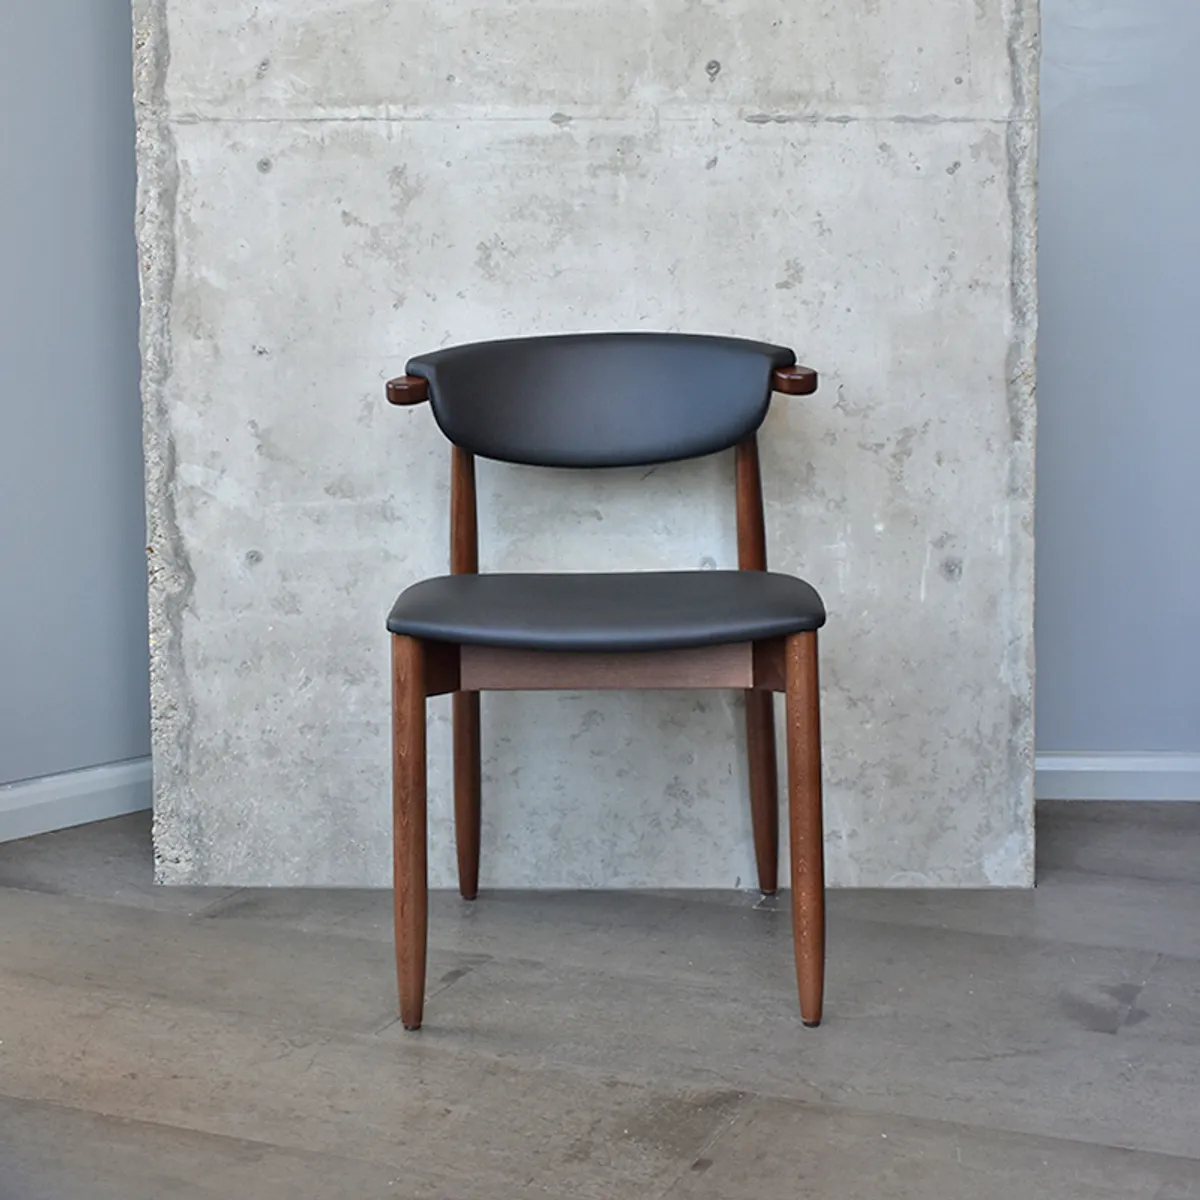 Jona Chair New Furniture From Milan 2019 By Inside Out Contracts 020